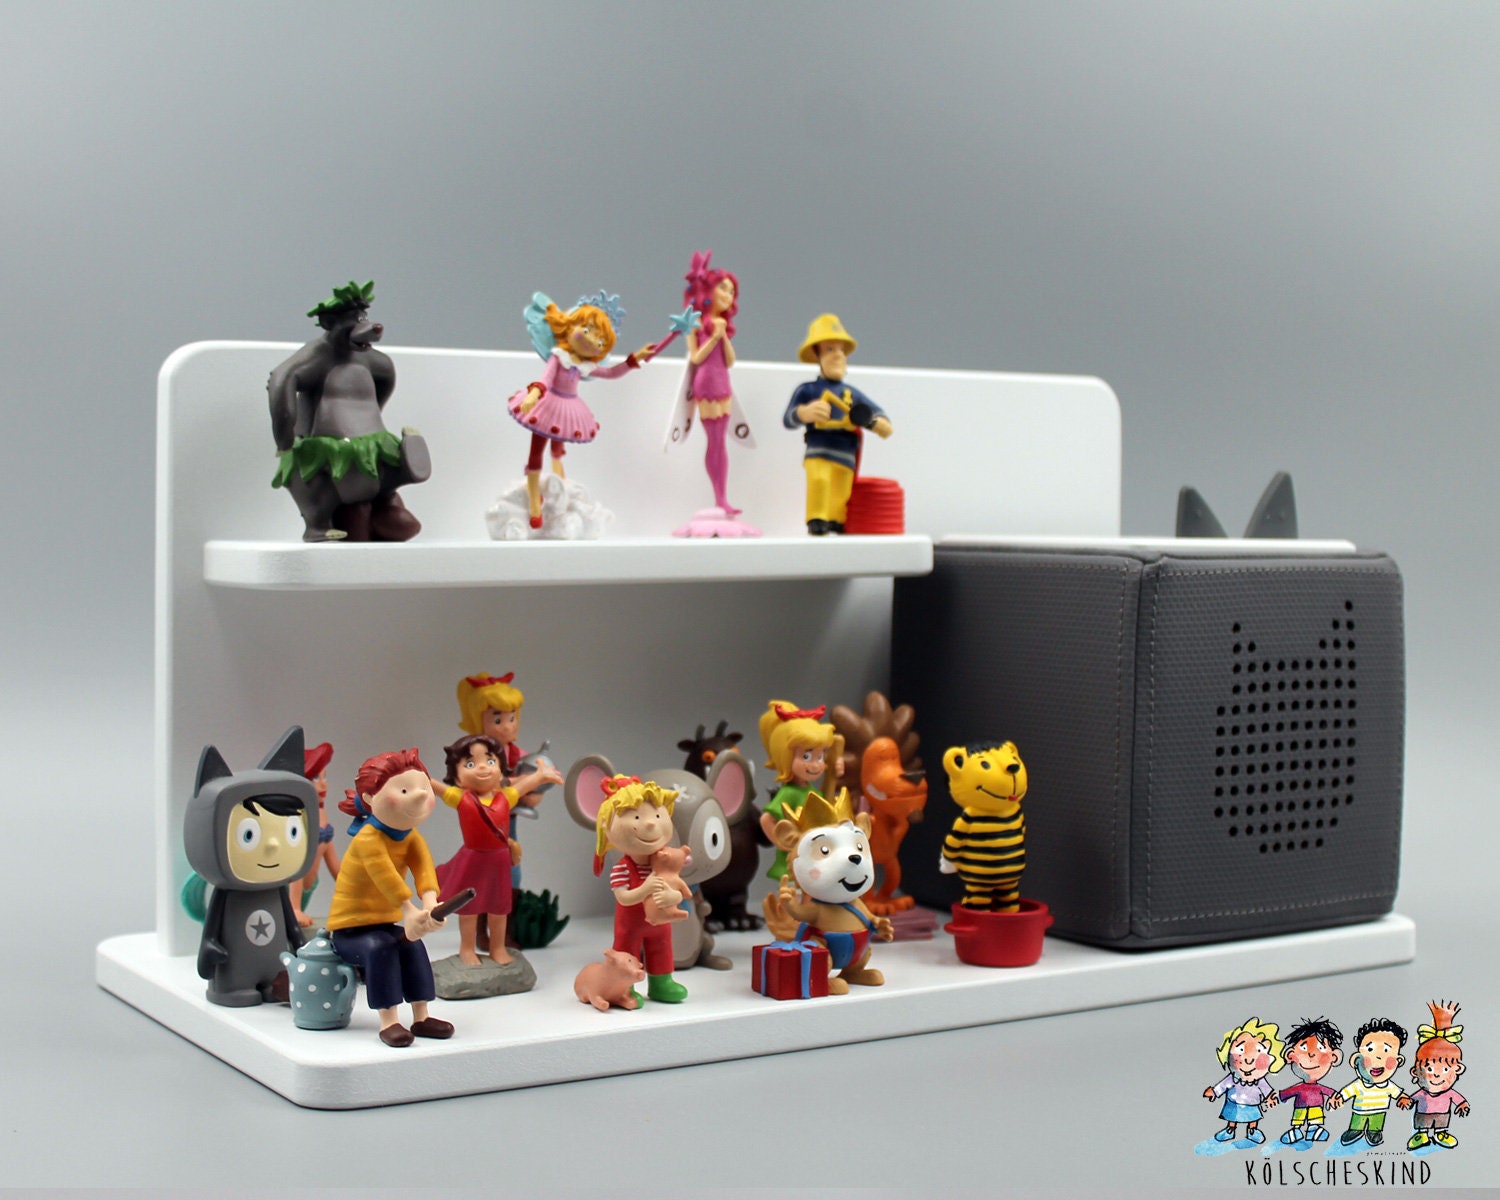 Shop for figurines for your Toniebox online at 42things Online Shop!